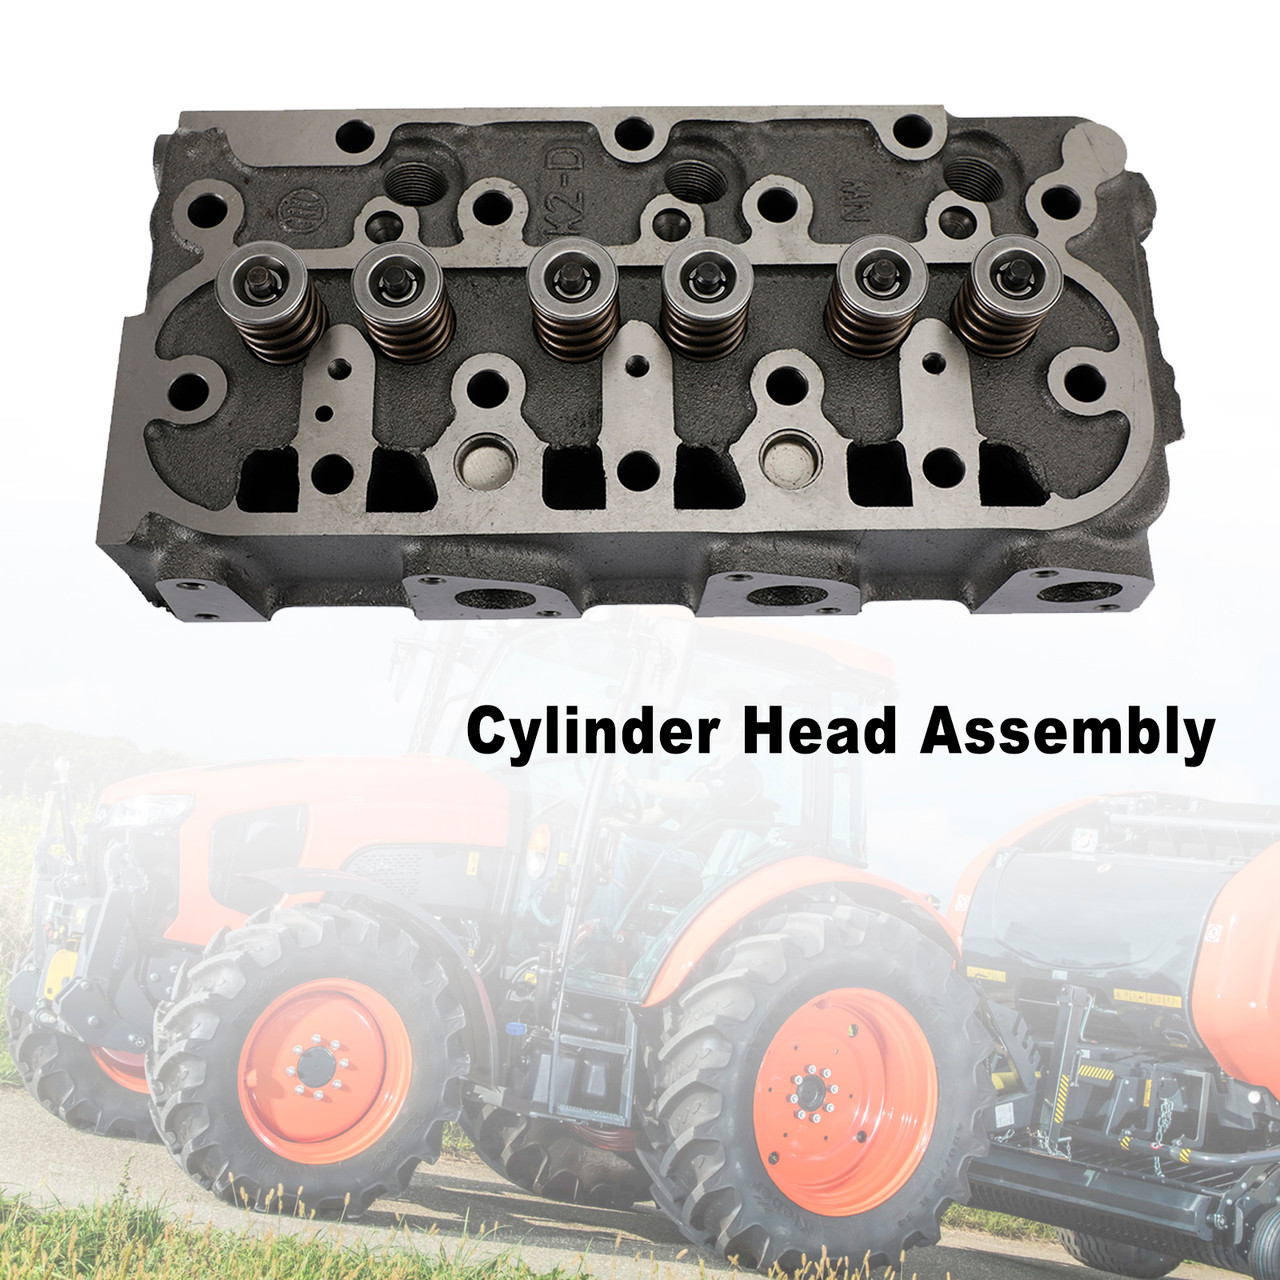 New "Complete" Cylinder Head Fits For Kubota D1105 Engine With Valves